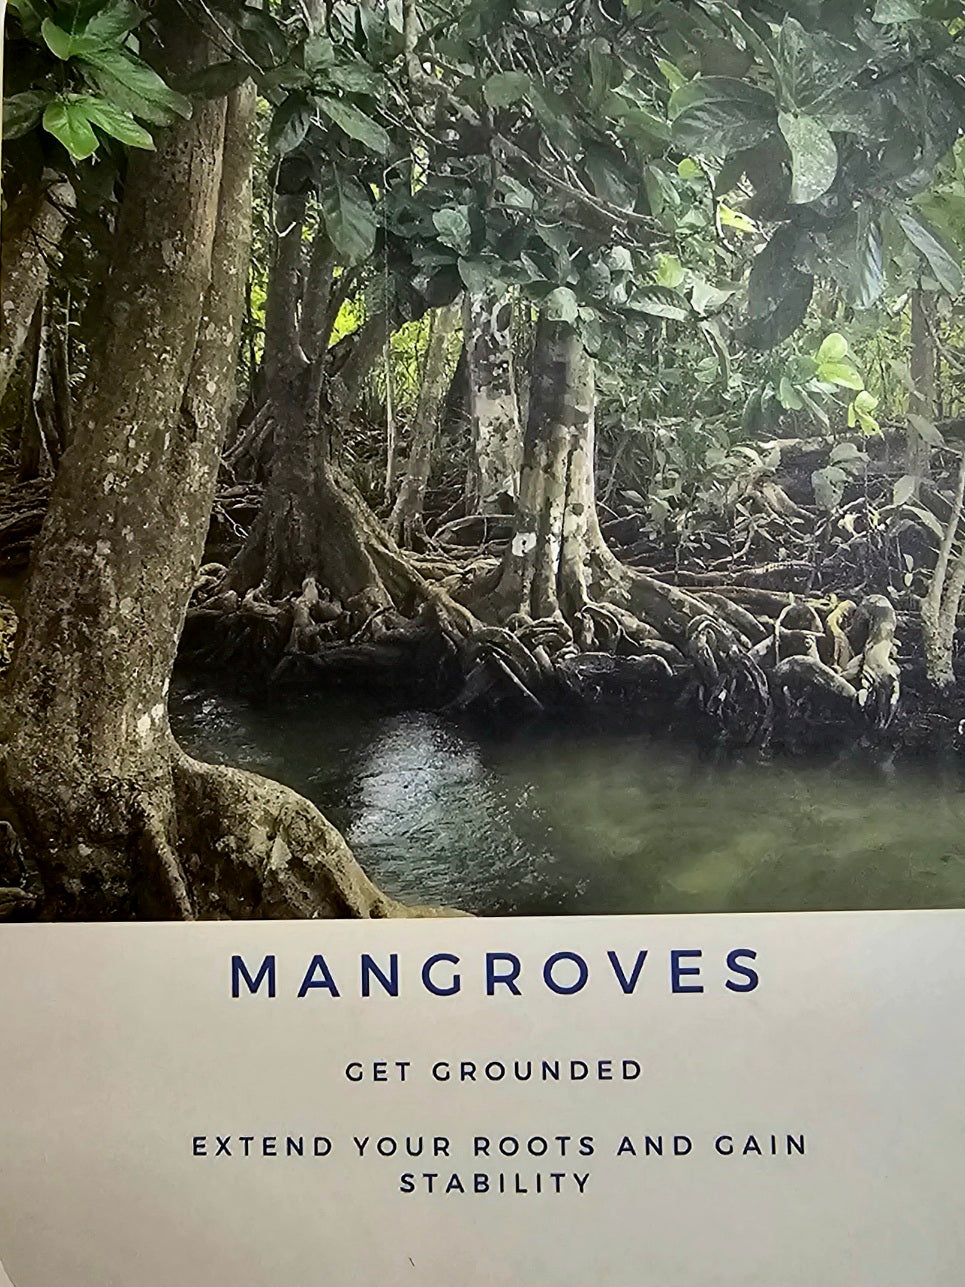 An image of a mangrove forest, followed by text that says, "Mangroves.  Get grounded.  Extend your roots and gain stability."